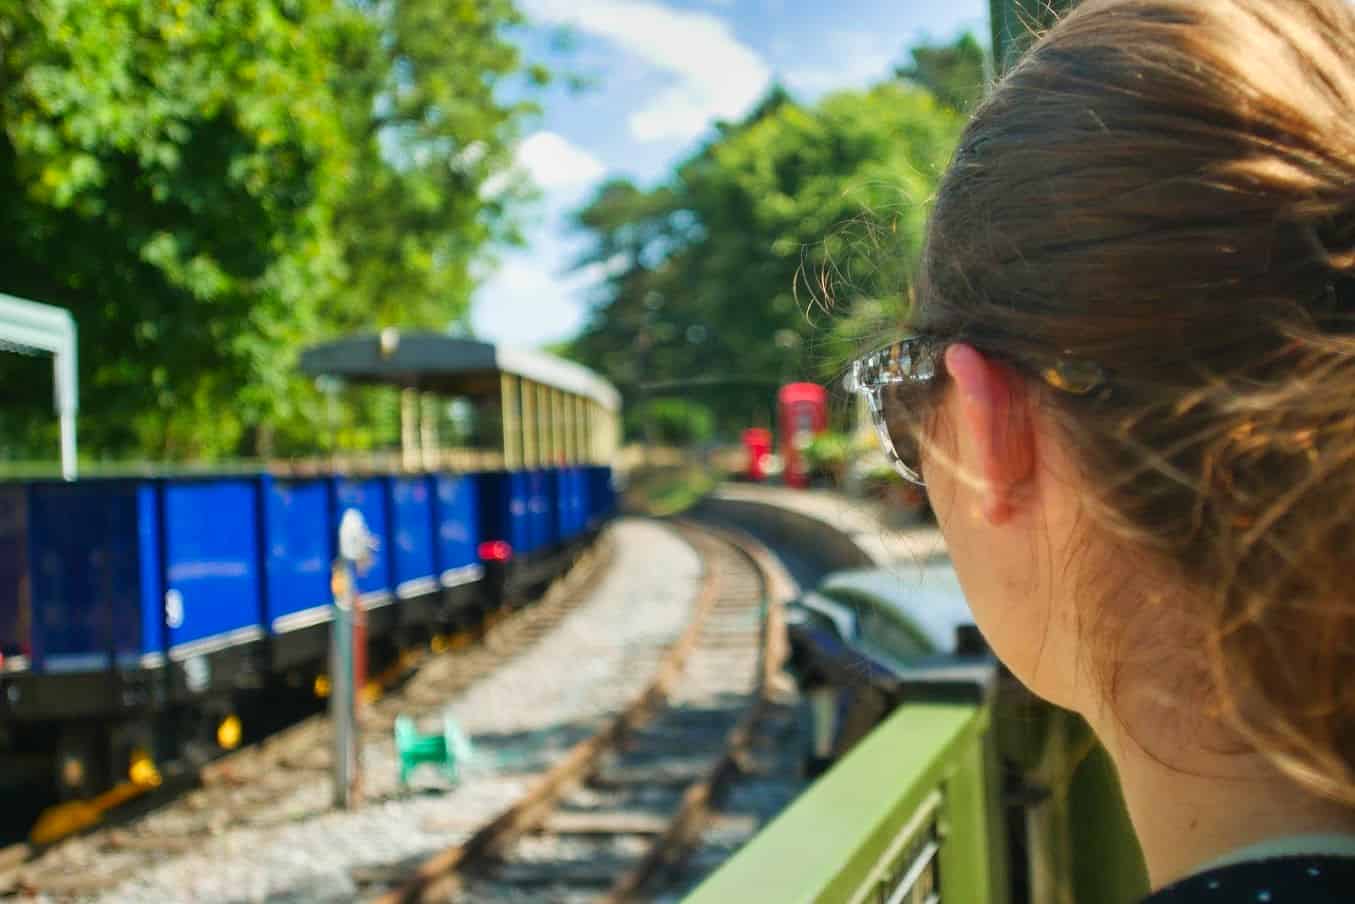 Kalyn looking at a blue train that can be ridden on through Whipsnade Zoo